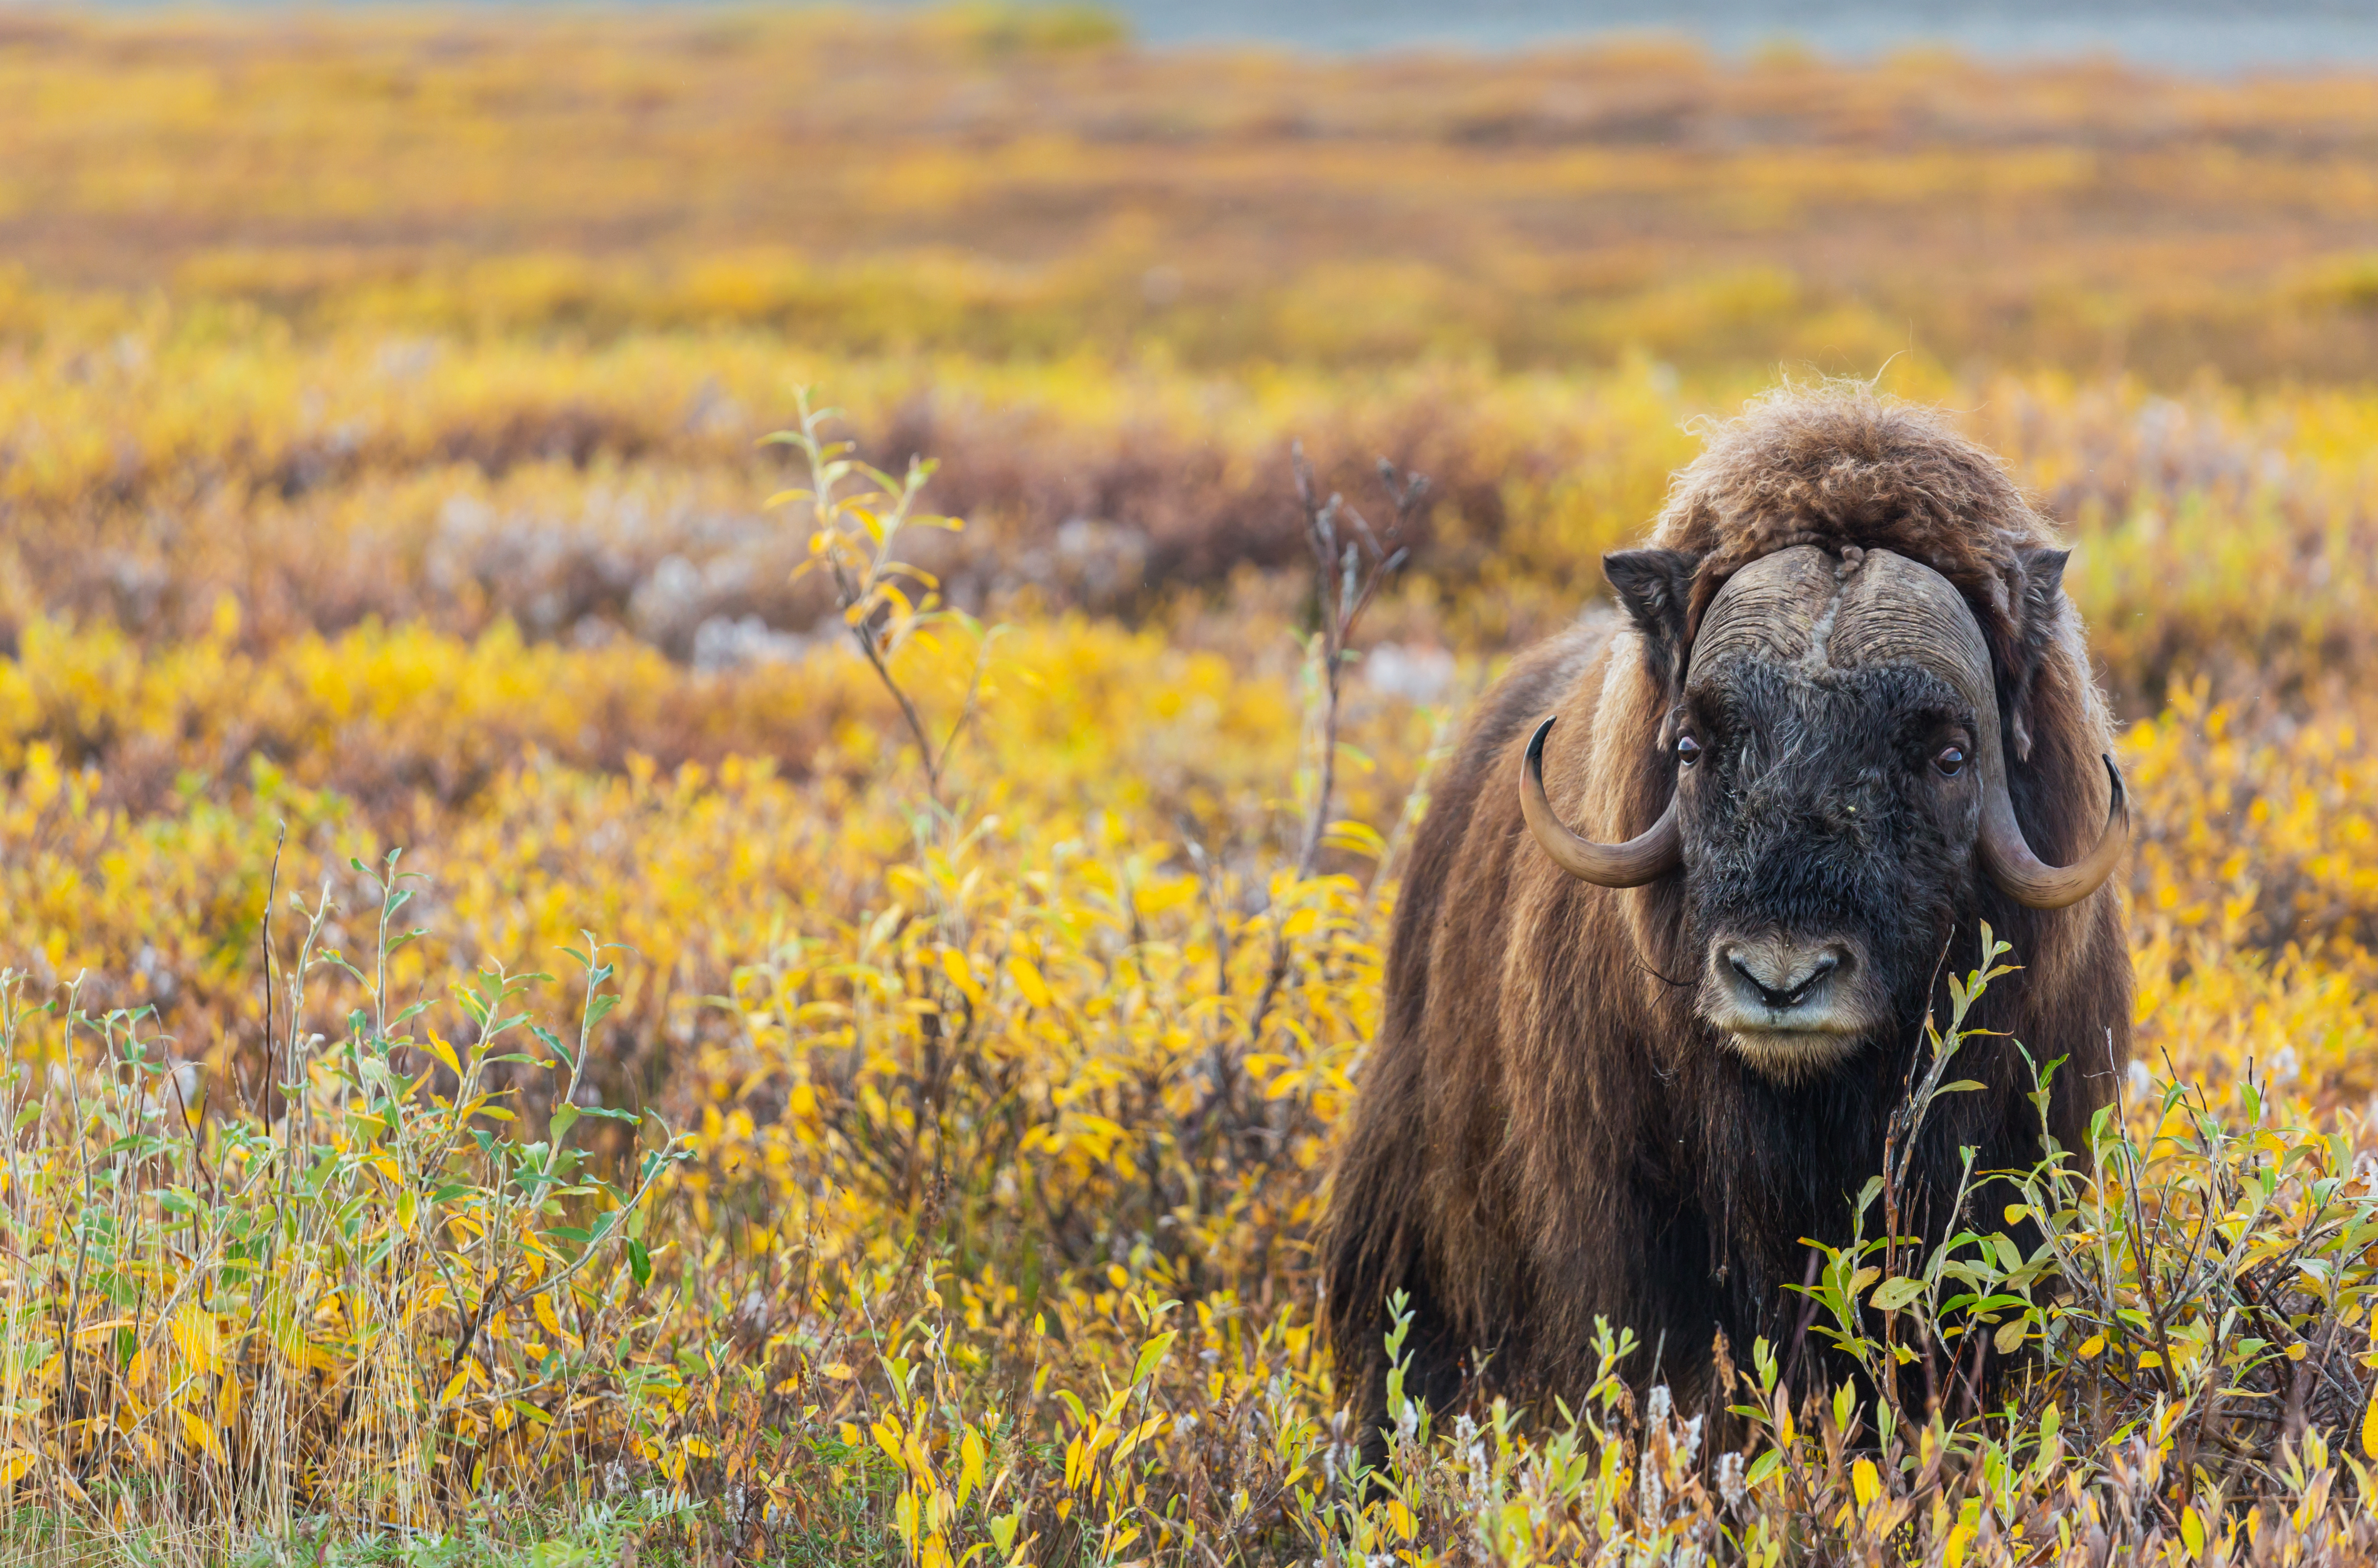 Wild muskox in an autumn landscape in the Arctic Tundra. Image Credit: Galyna Andrushko, Envato Elements.